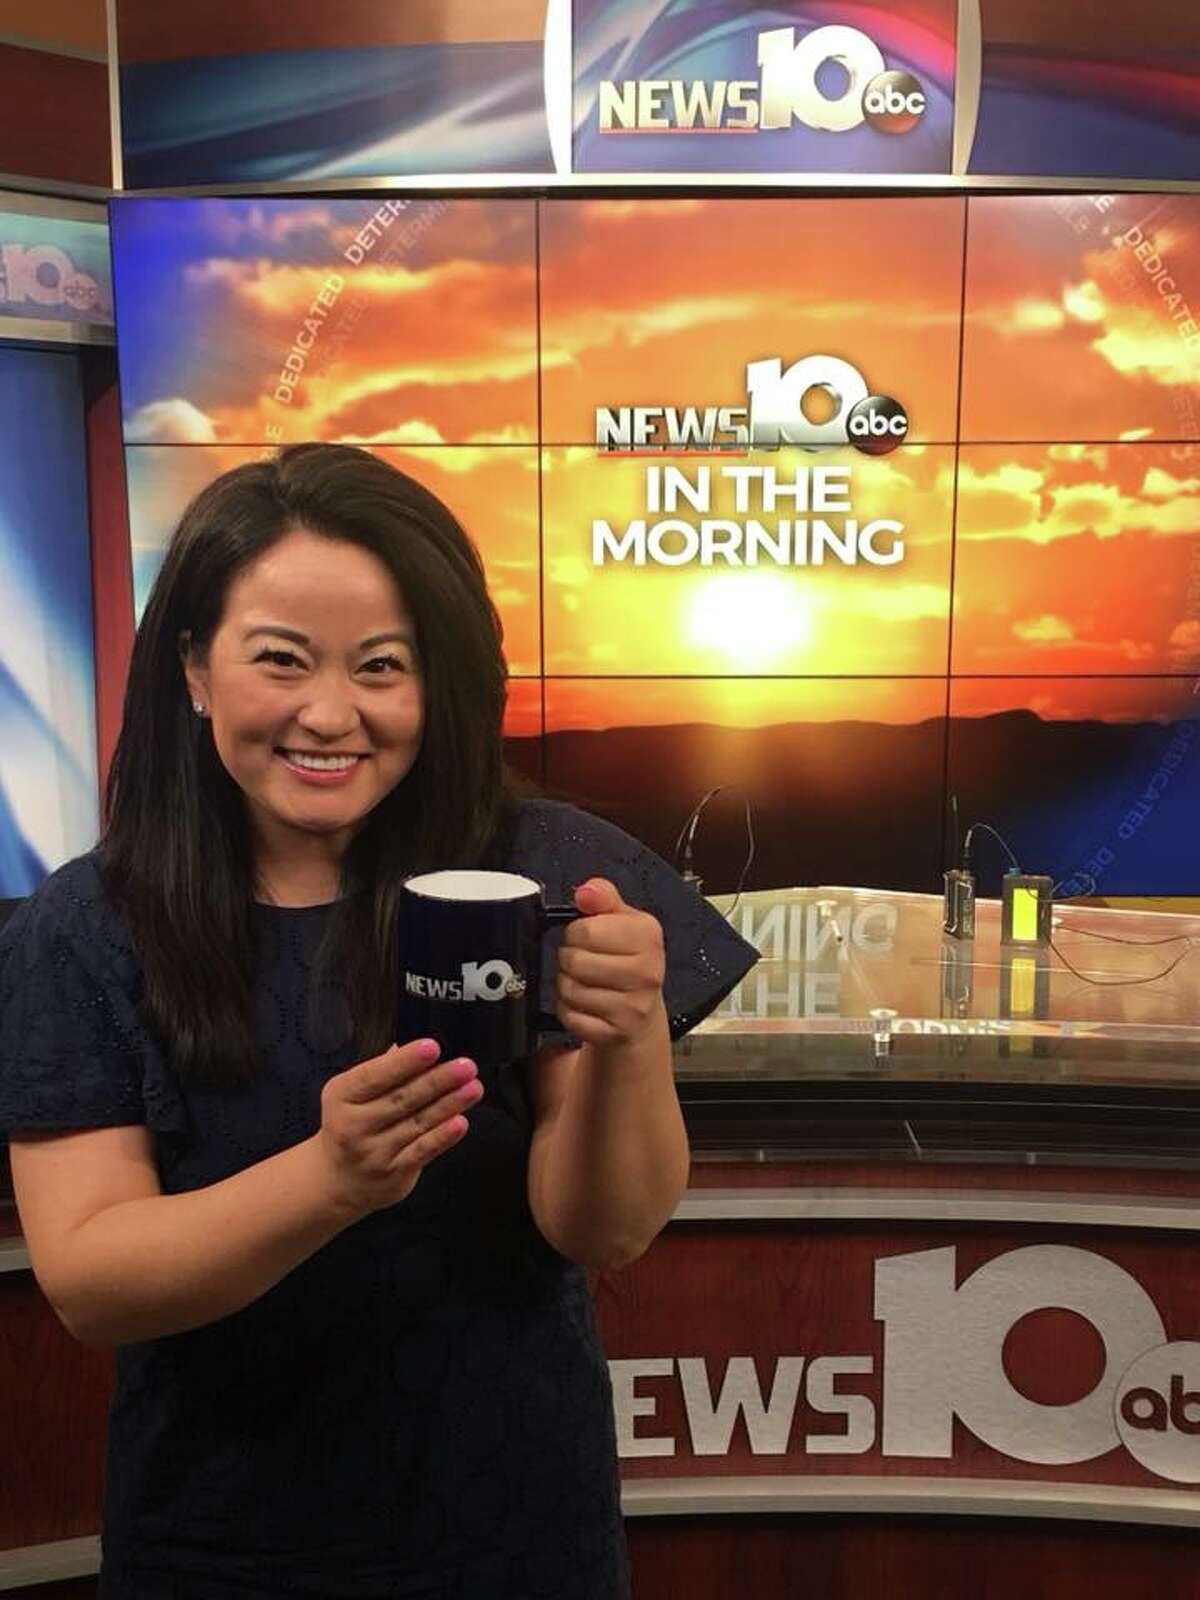 Jess Briganti, the morning meteorologist at WTEN (News 10 ABC), left the station in March when her contract expired. Briganti wrote, in part, on social media “I’m going to be giving my last forecast at WTEN when you #wakeupwith10 Wednesday, March 11. To have gotten the chance to grow personally and professionally is a gift that I don’t take for granted. Forecasting on-air for the last 8.5 years means I’ve been living my dream and pursuing my passion. The adventure from Youngstown took a leap of faith and I have been blessed to love the past two years in Albany.” Briganti’s family, as well as her boyfriend, live out of the area and she came to Albany for the job at WTEN. Read more. 